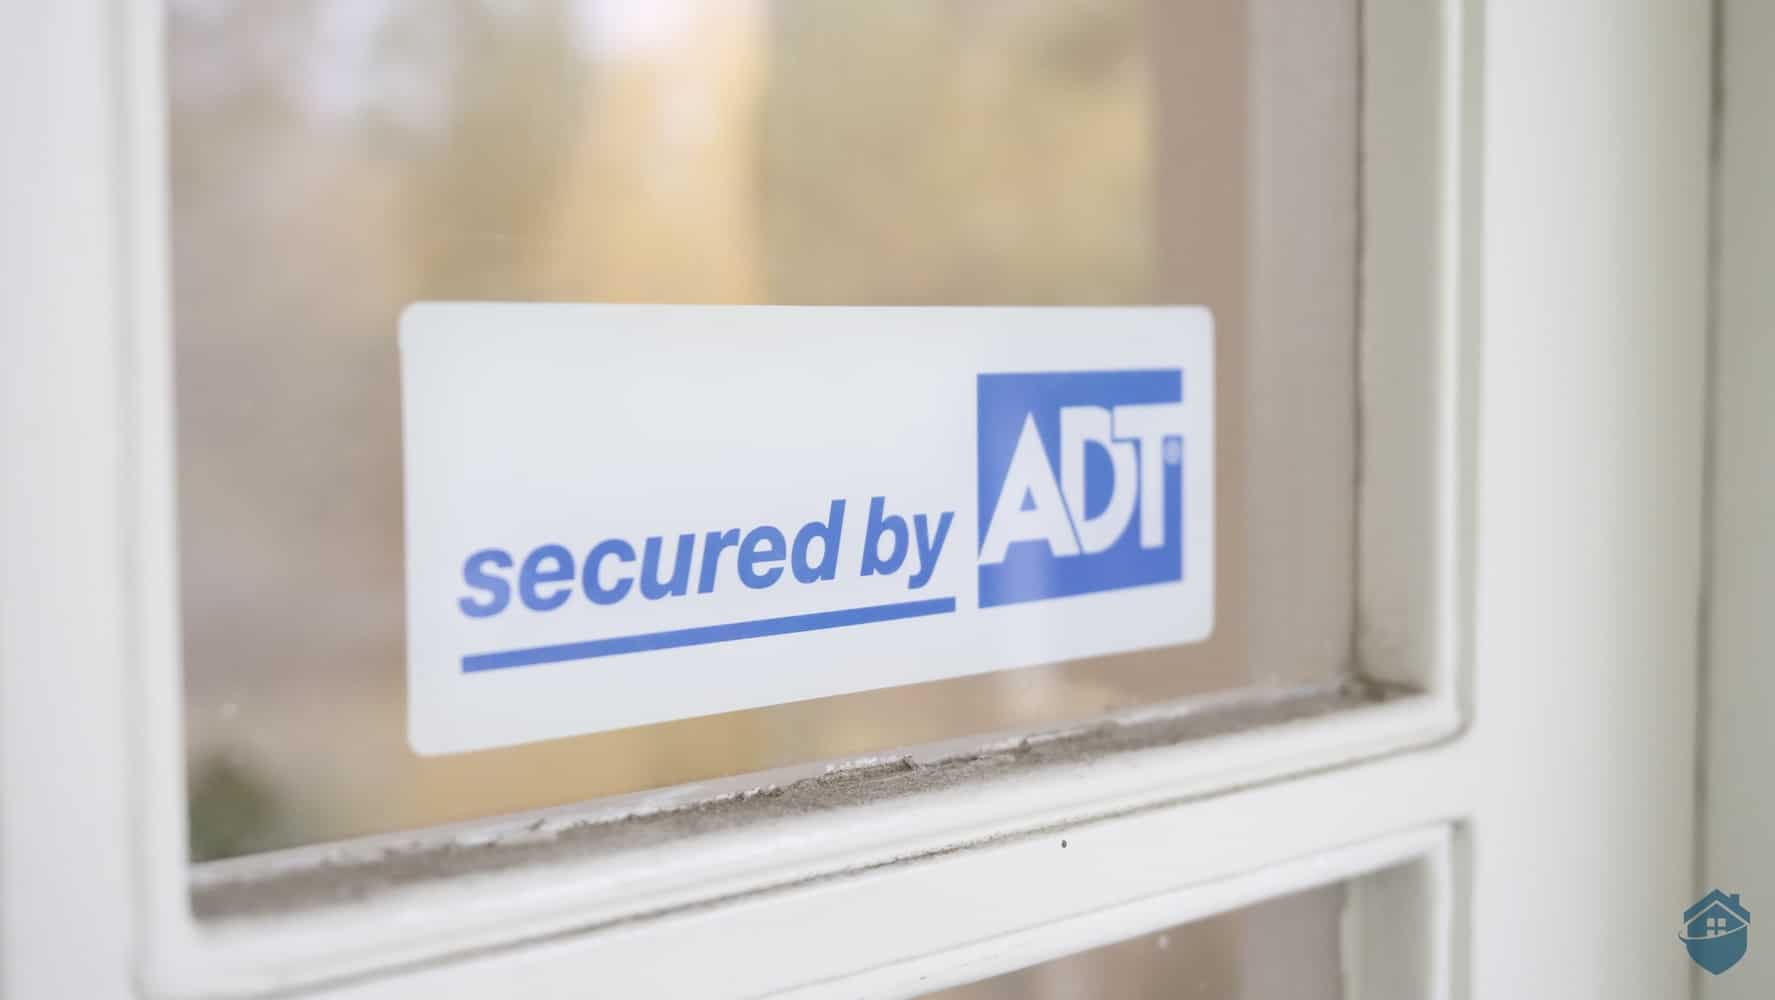 Secured by ADT Decal